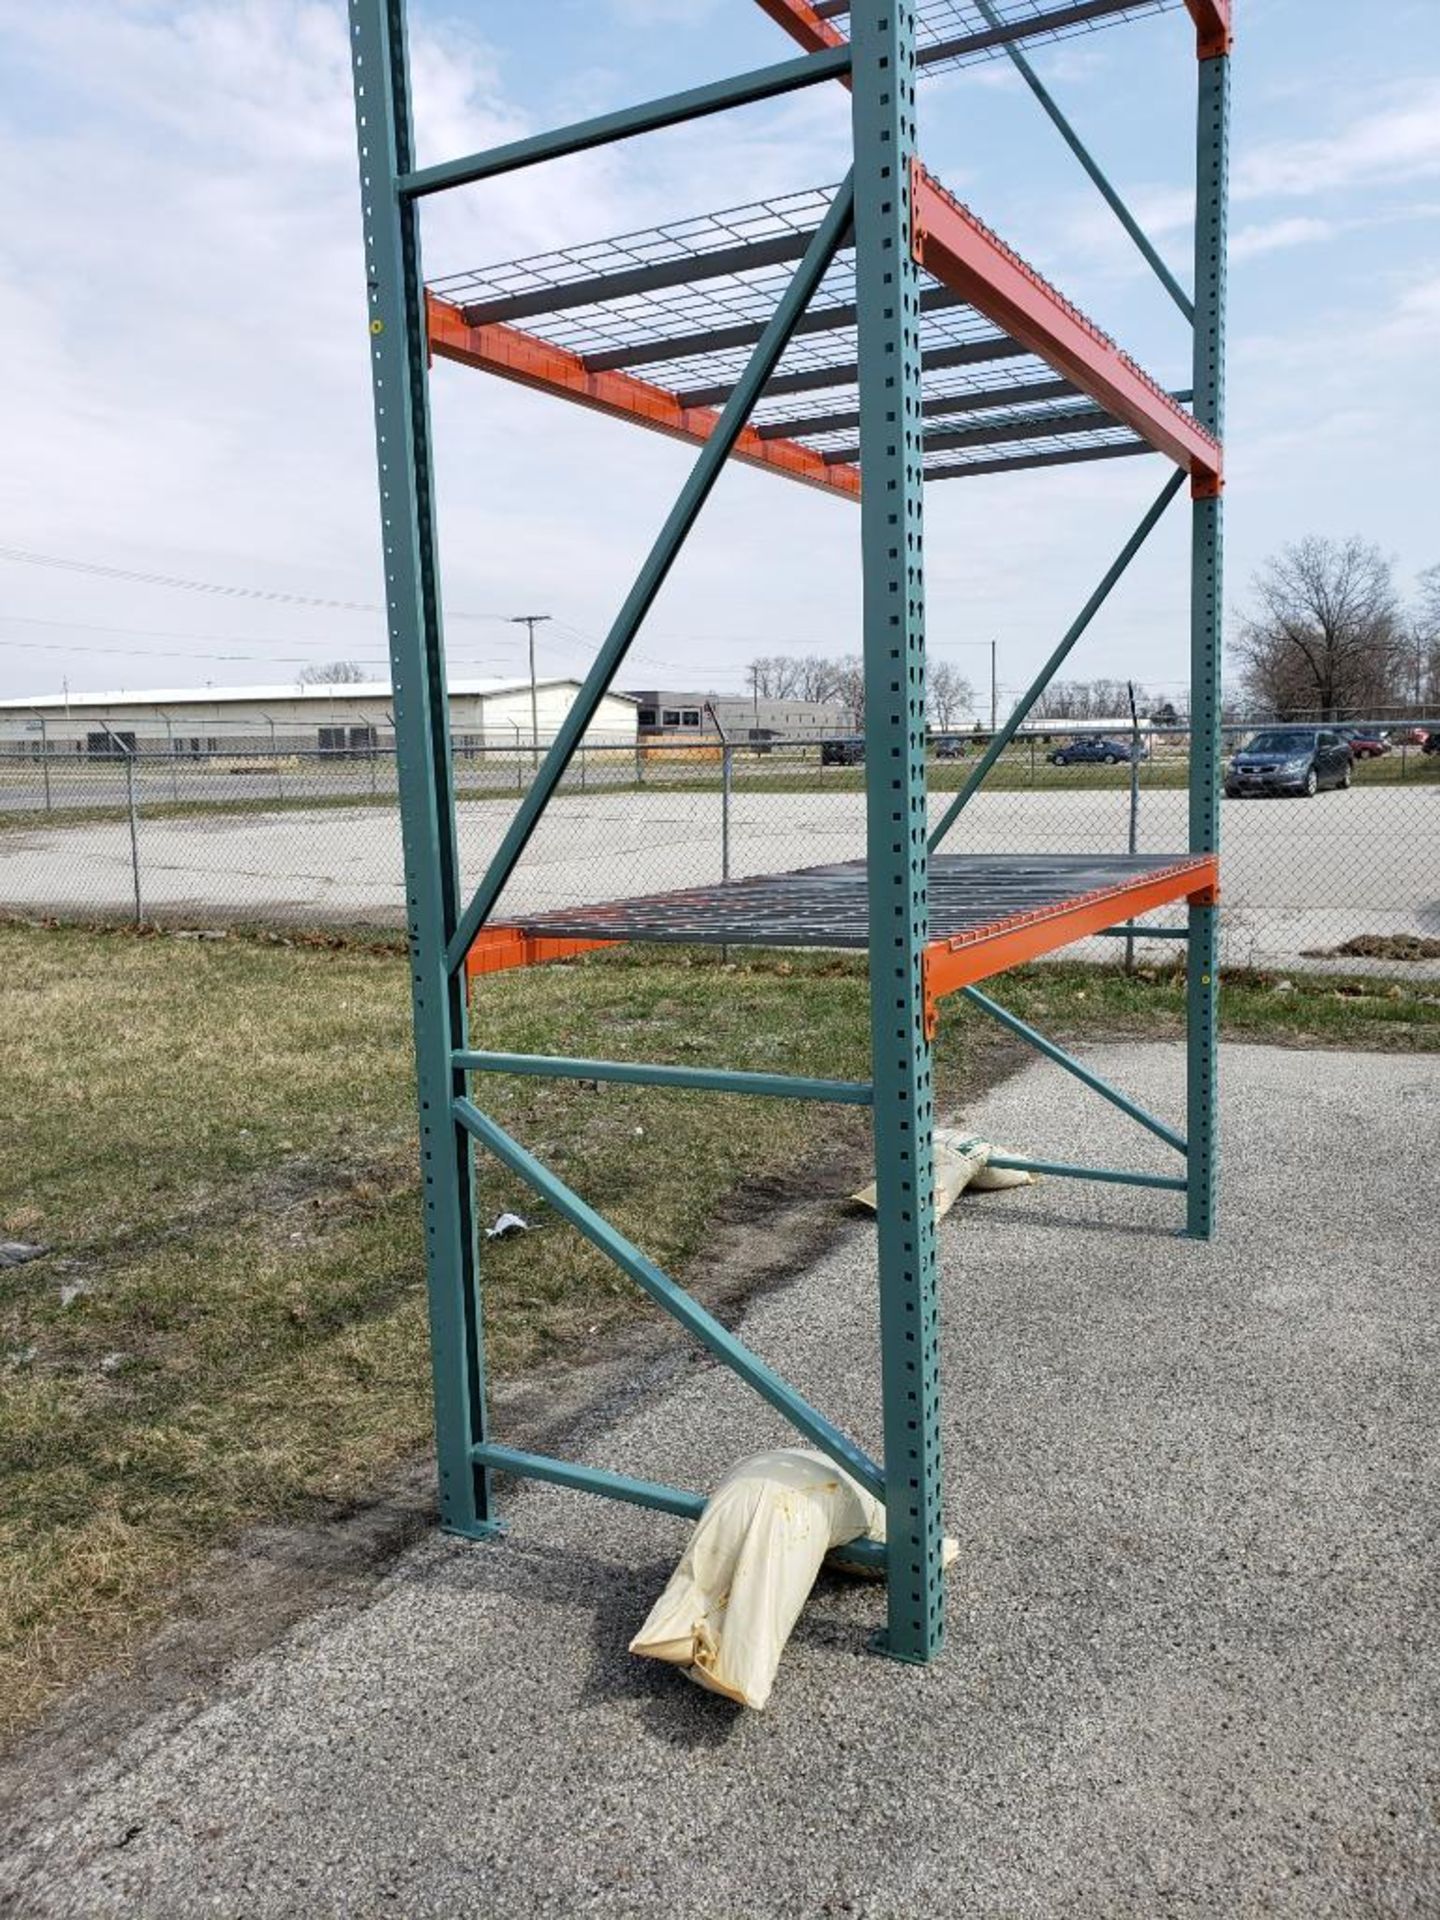 Qty 5 - NEW 16ft x 42in Teardrop Pallet Rack Upright, 3" x 3" Column, Green, 23,900# Capacity at 48" - Image 10 of 11